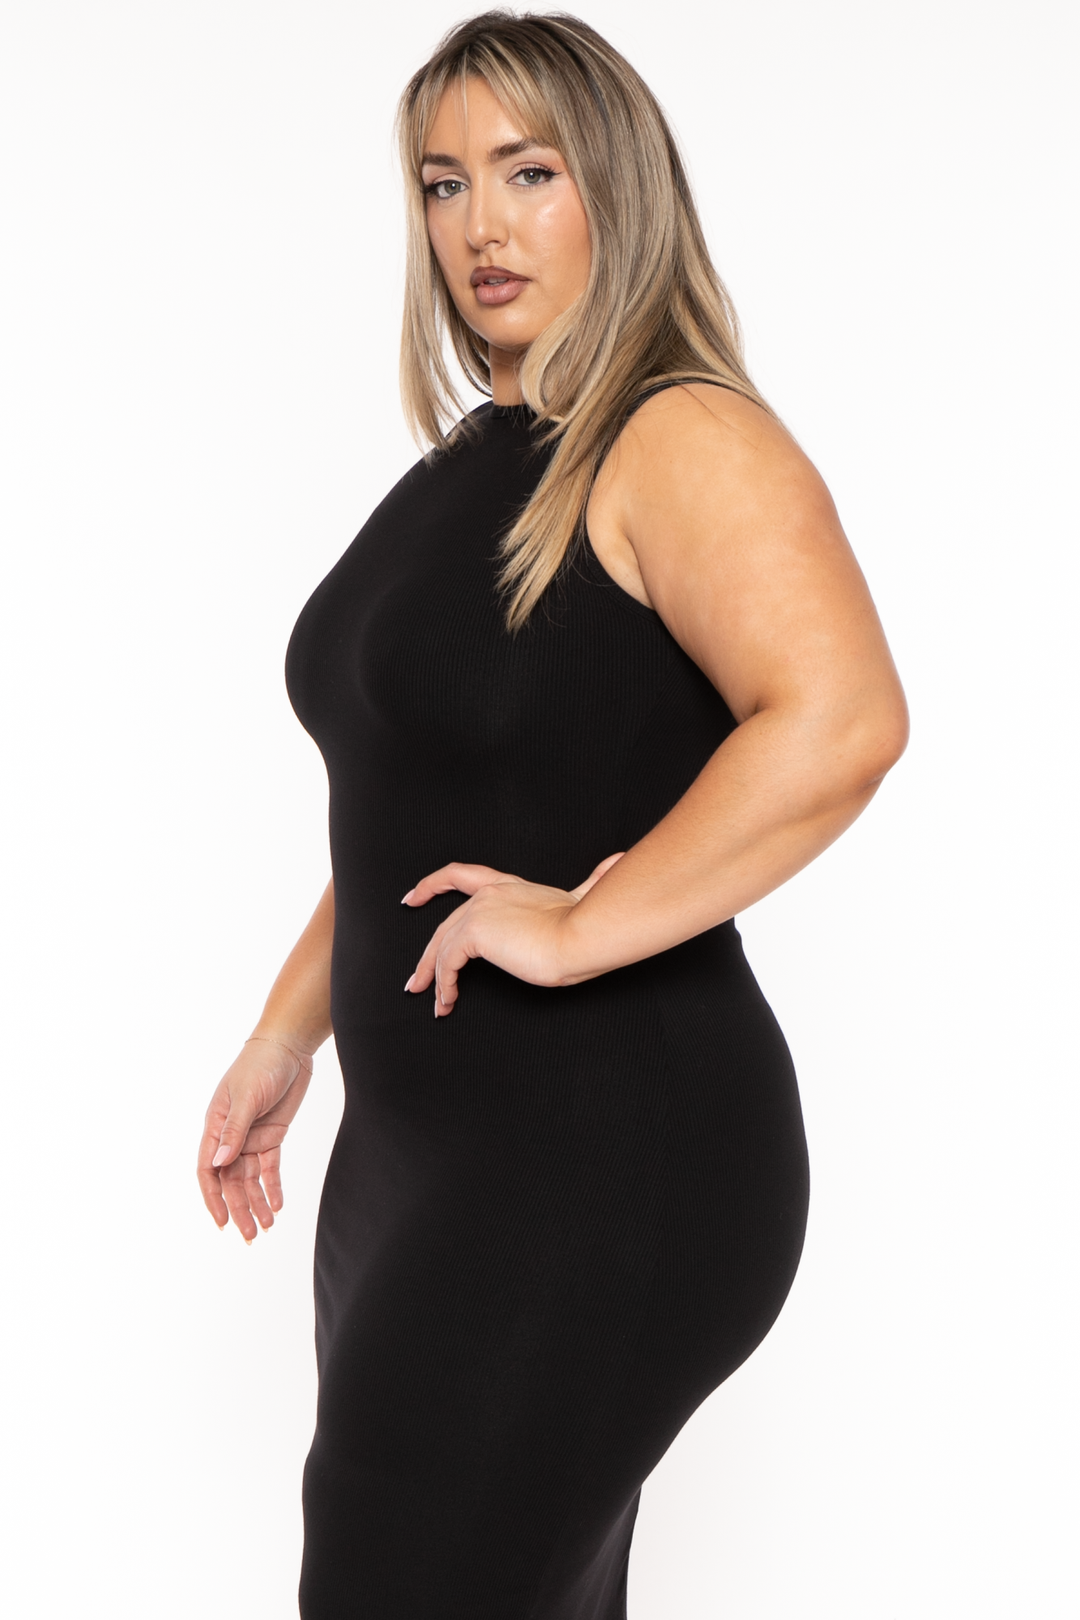 Plus Size Women's Clothing From CurvySense.com 